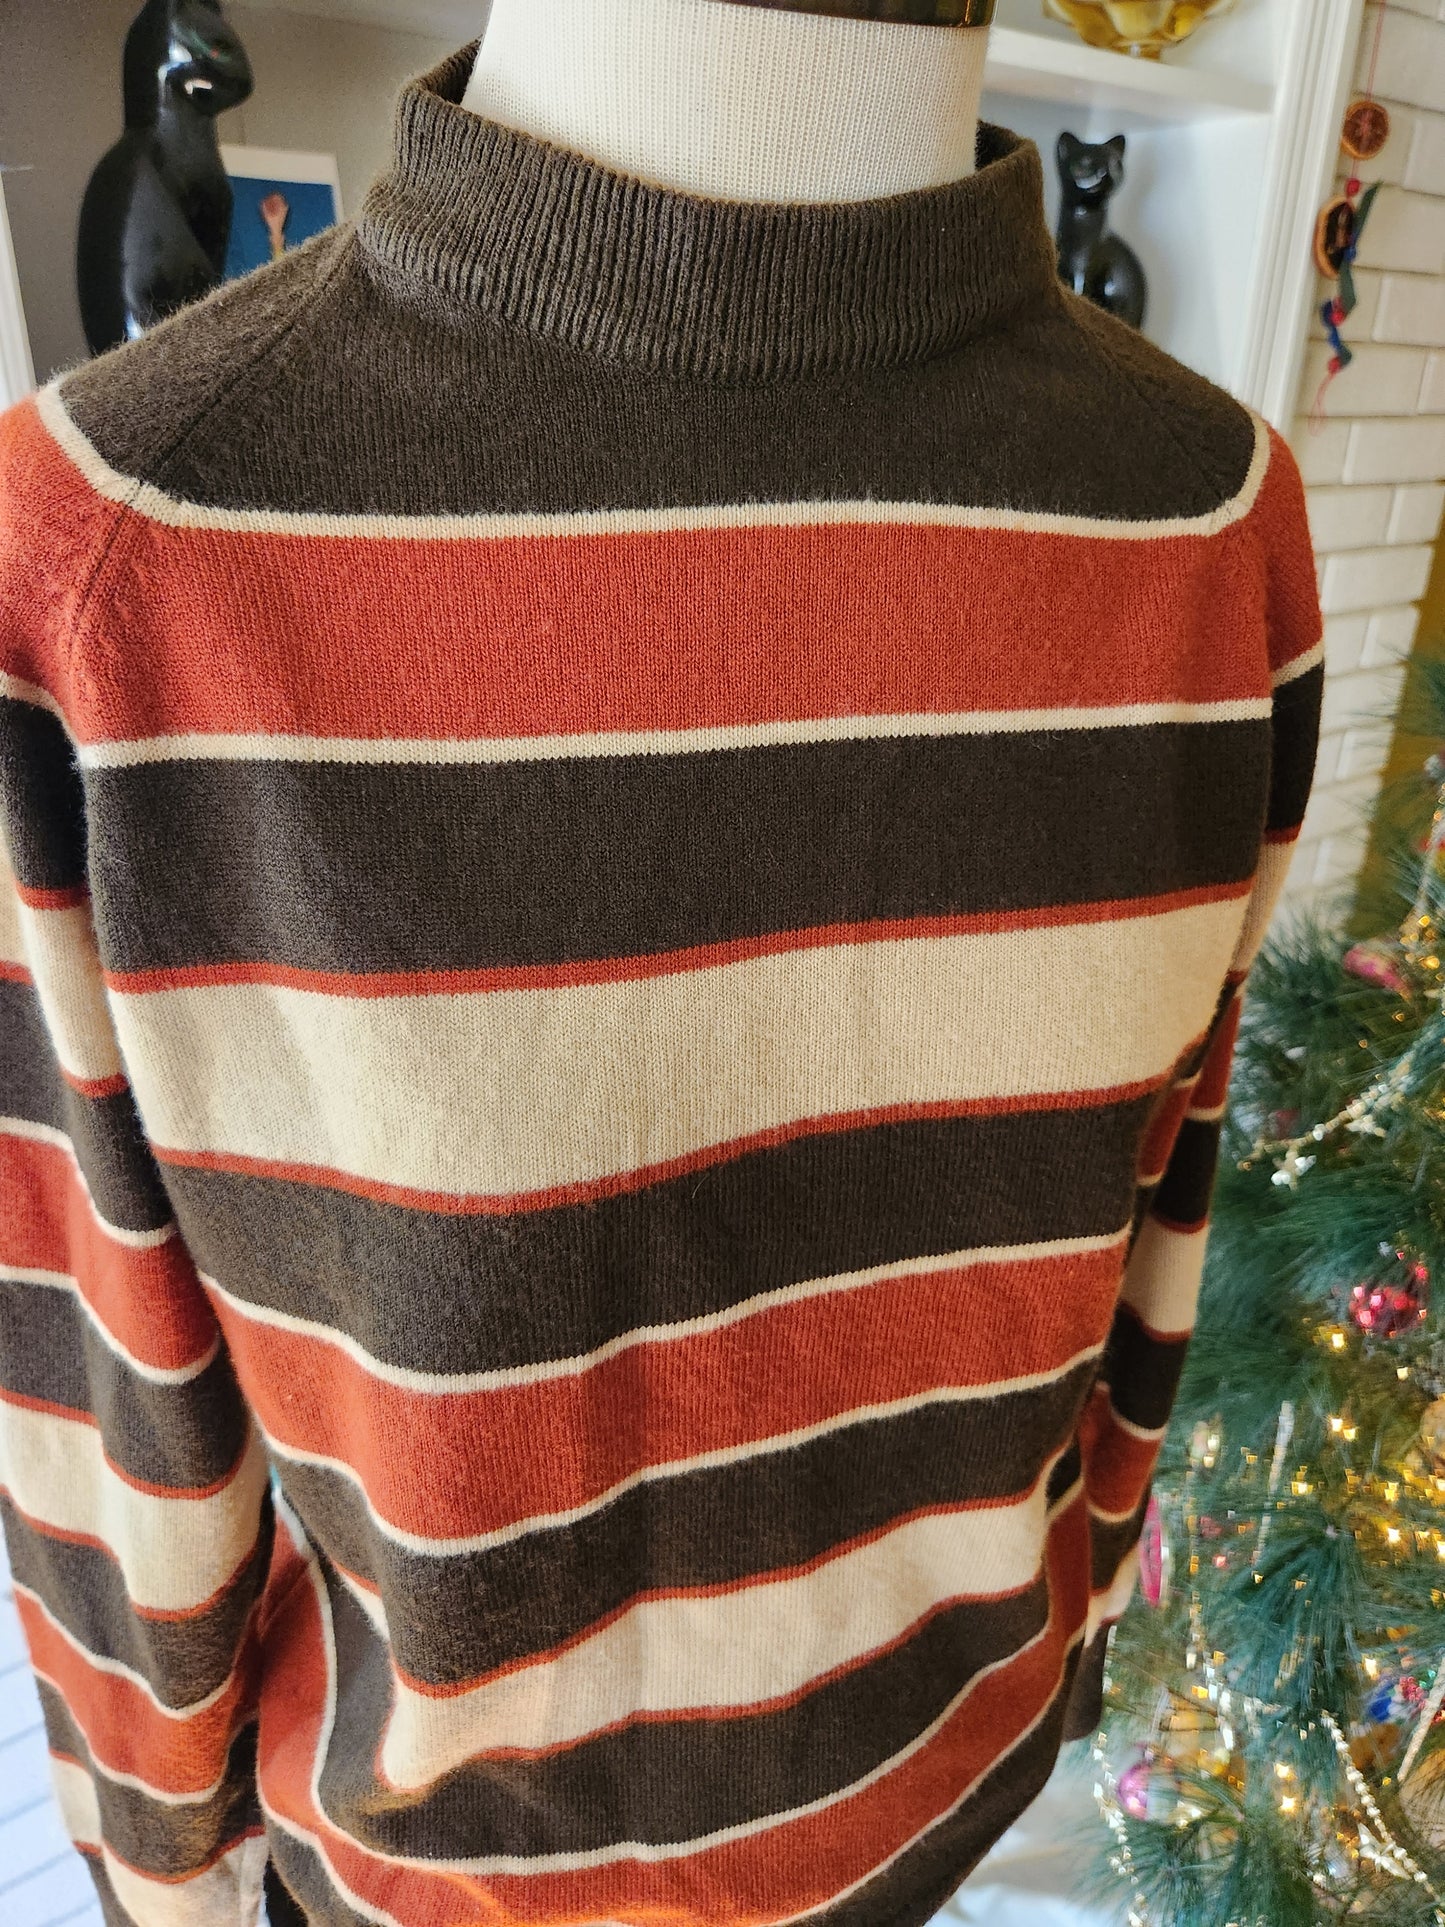 Vintage Striped Sweater by National